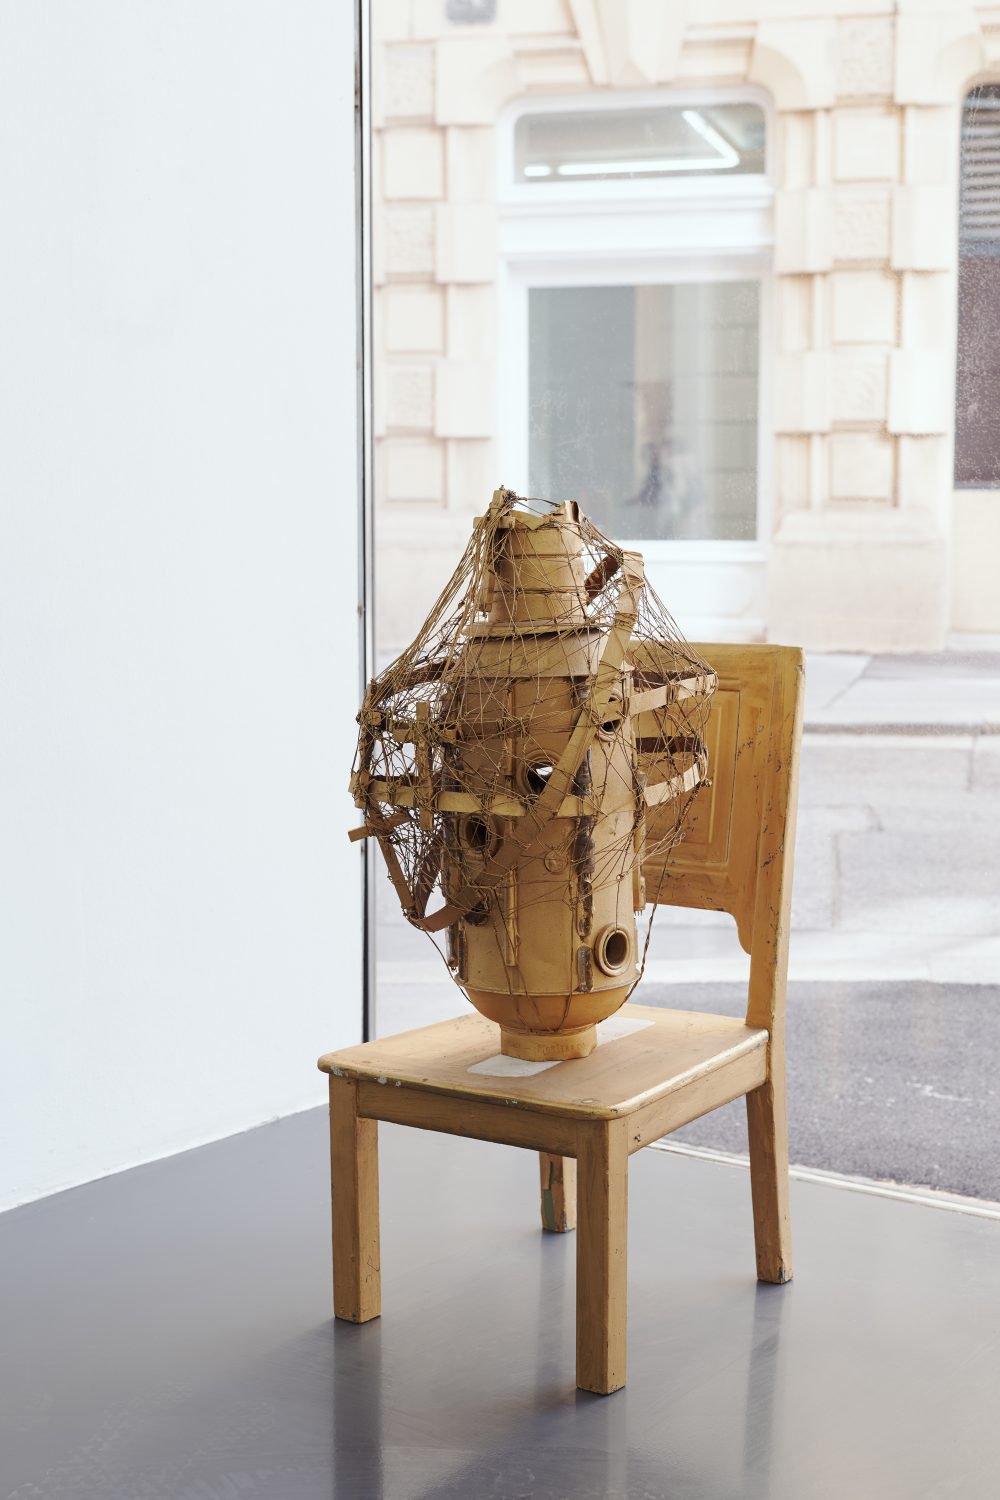 Stano FilkoMonstrance on chairFound object, wood, mixed media96 x 45 x 47 cmMULTIMODAL GOOGLIFICATION OF COSMOLOGY-ORIENTED DIAGRAMMATIC EXPERIMENTATIONS OF STANO FILKO, Layr Seilerstaette, Vienna, 2019